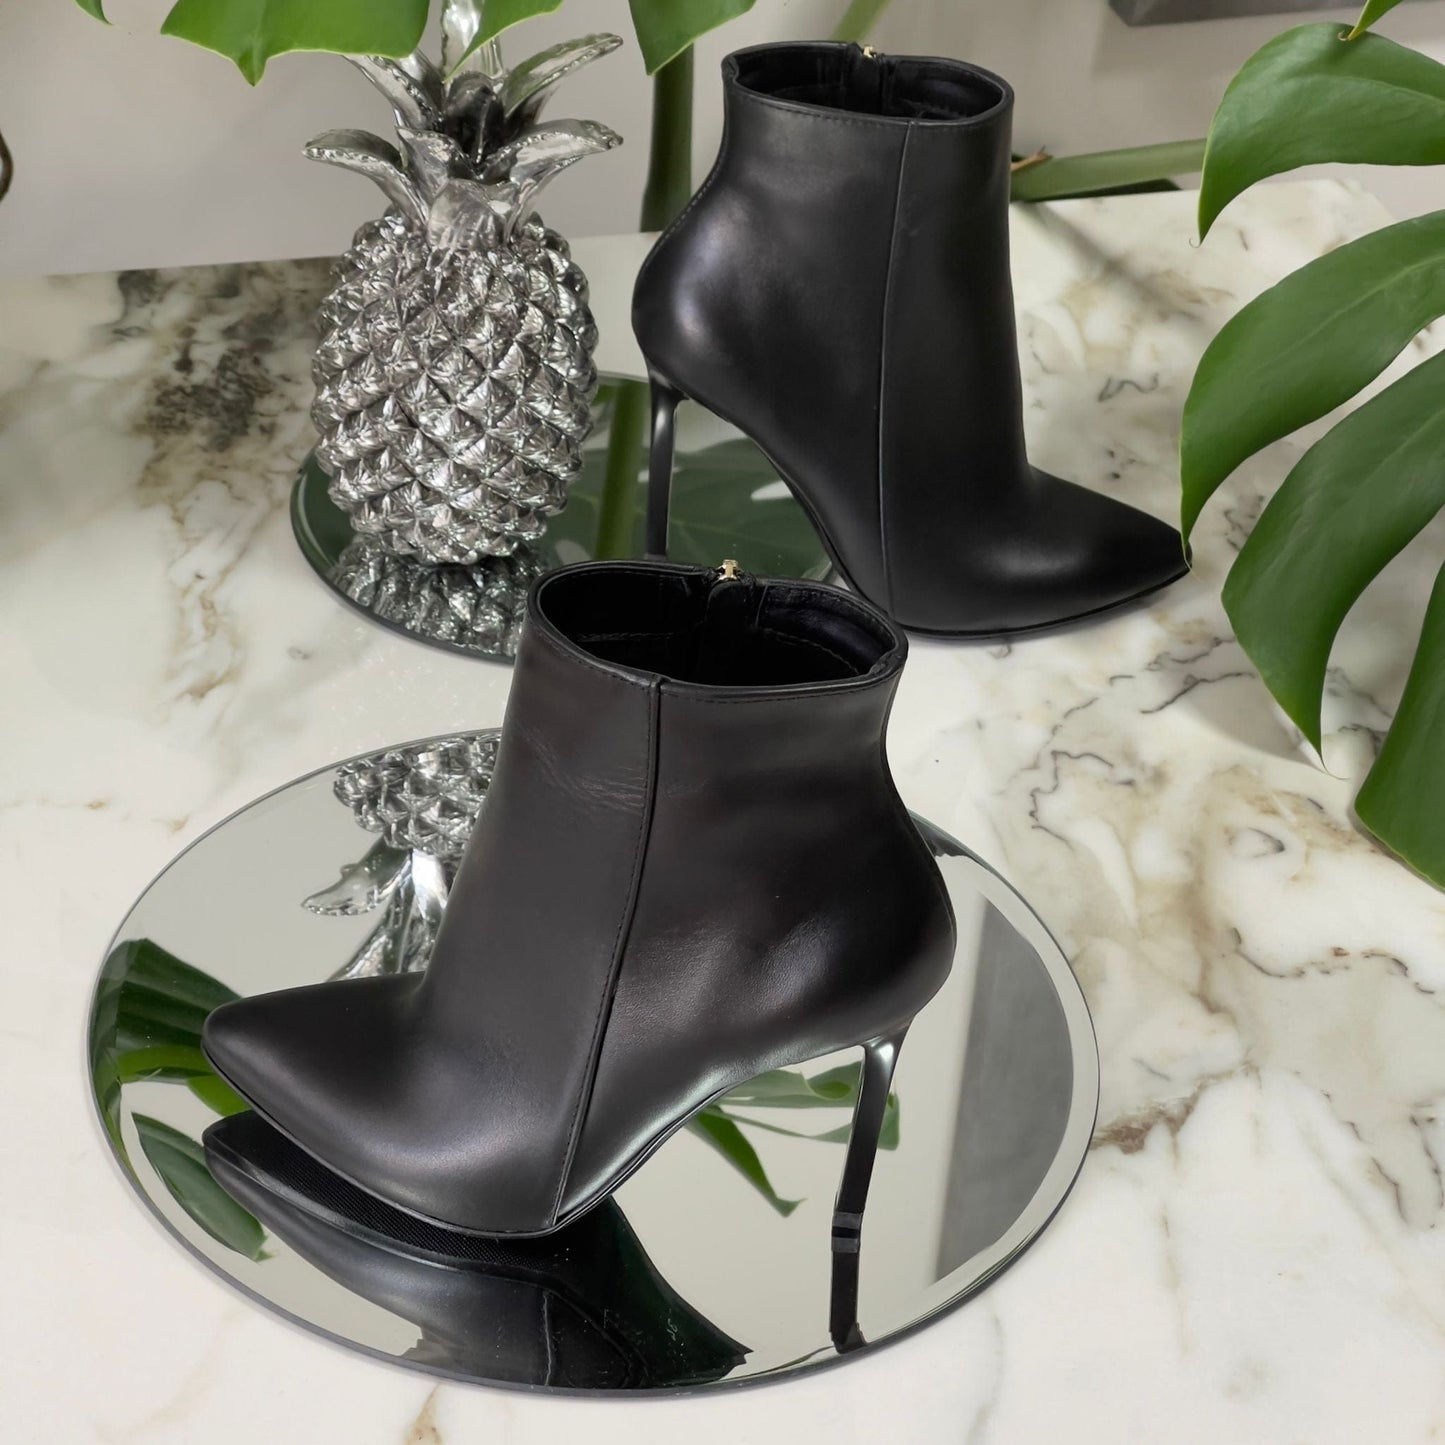 Black leather pointed toe ankle boots